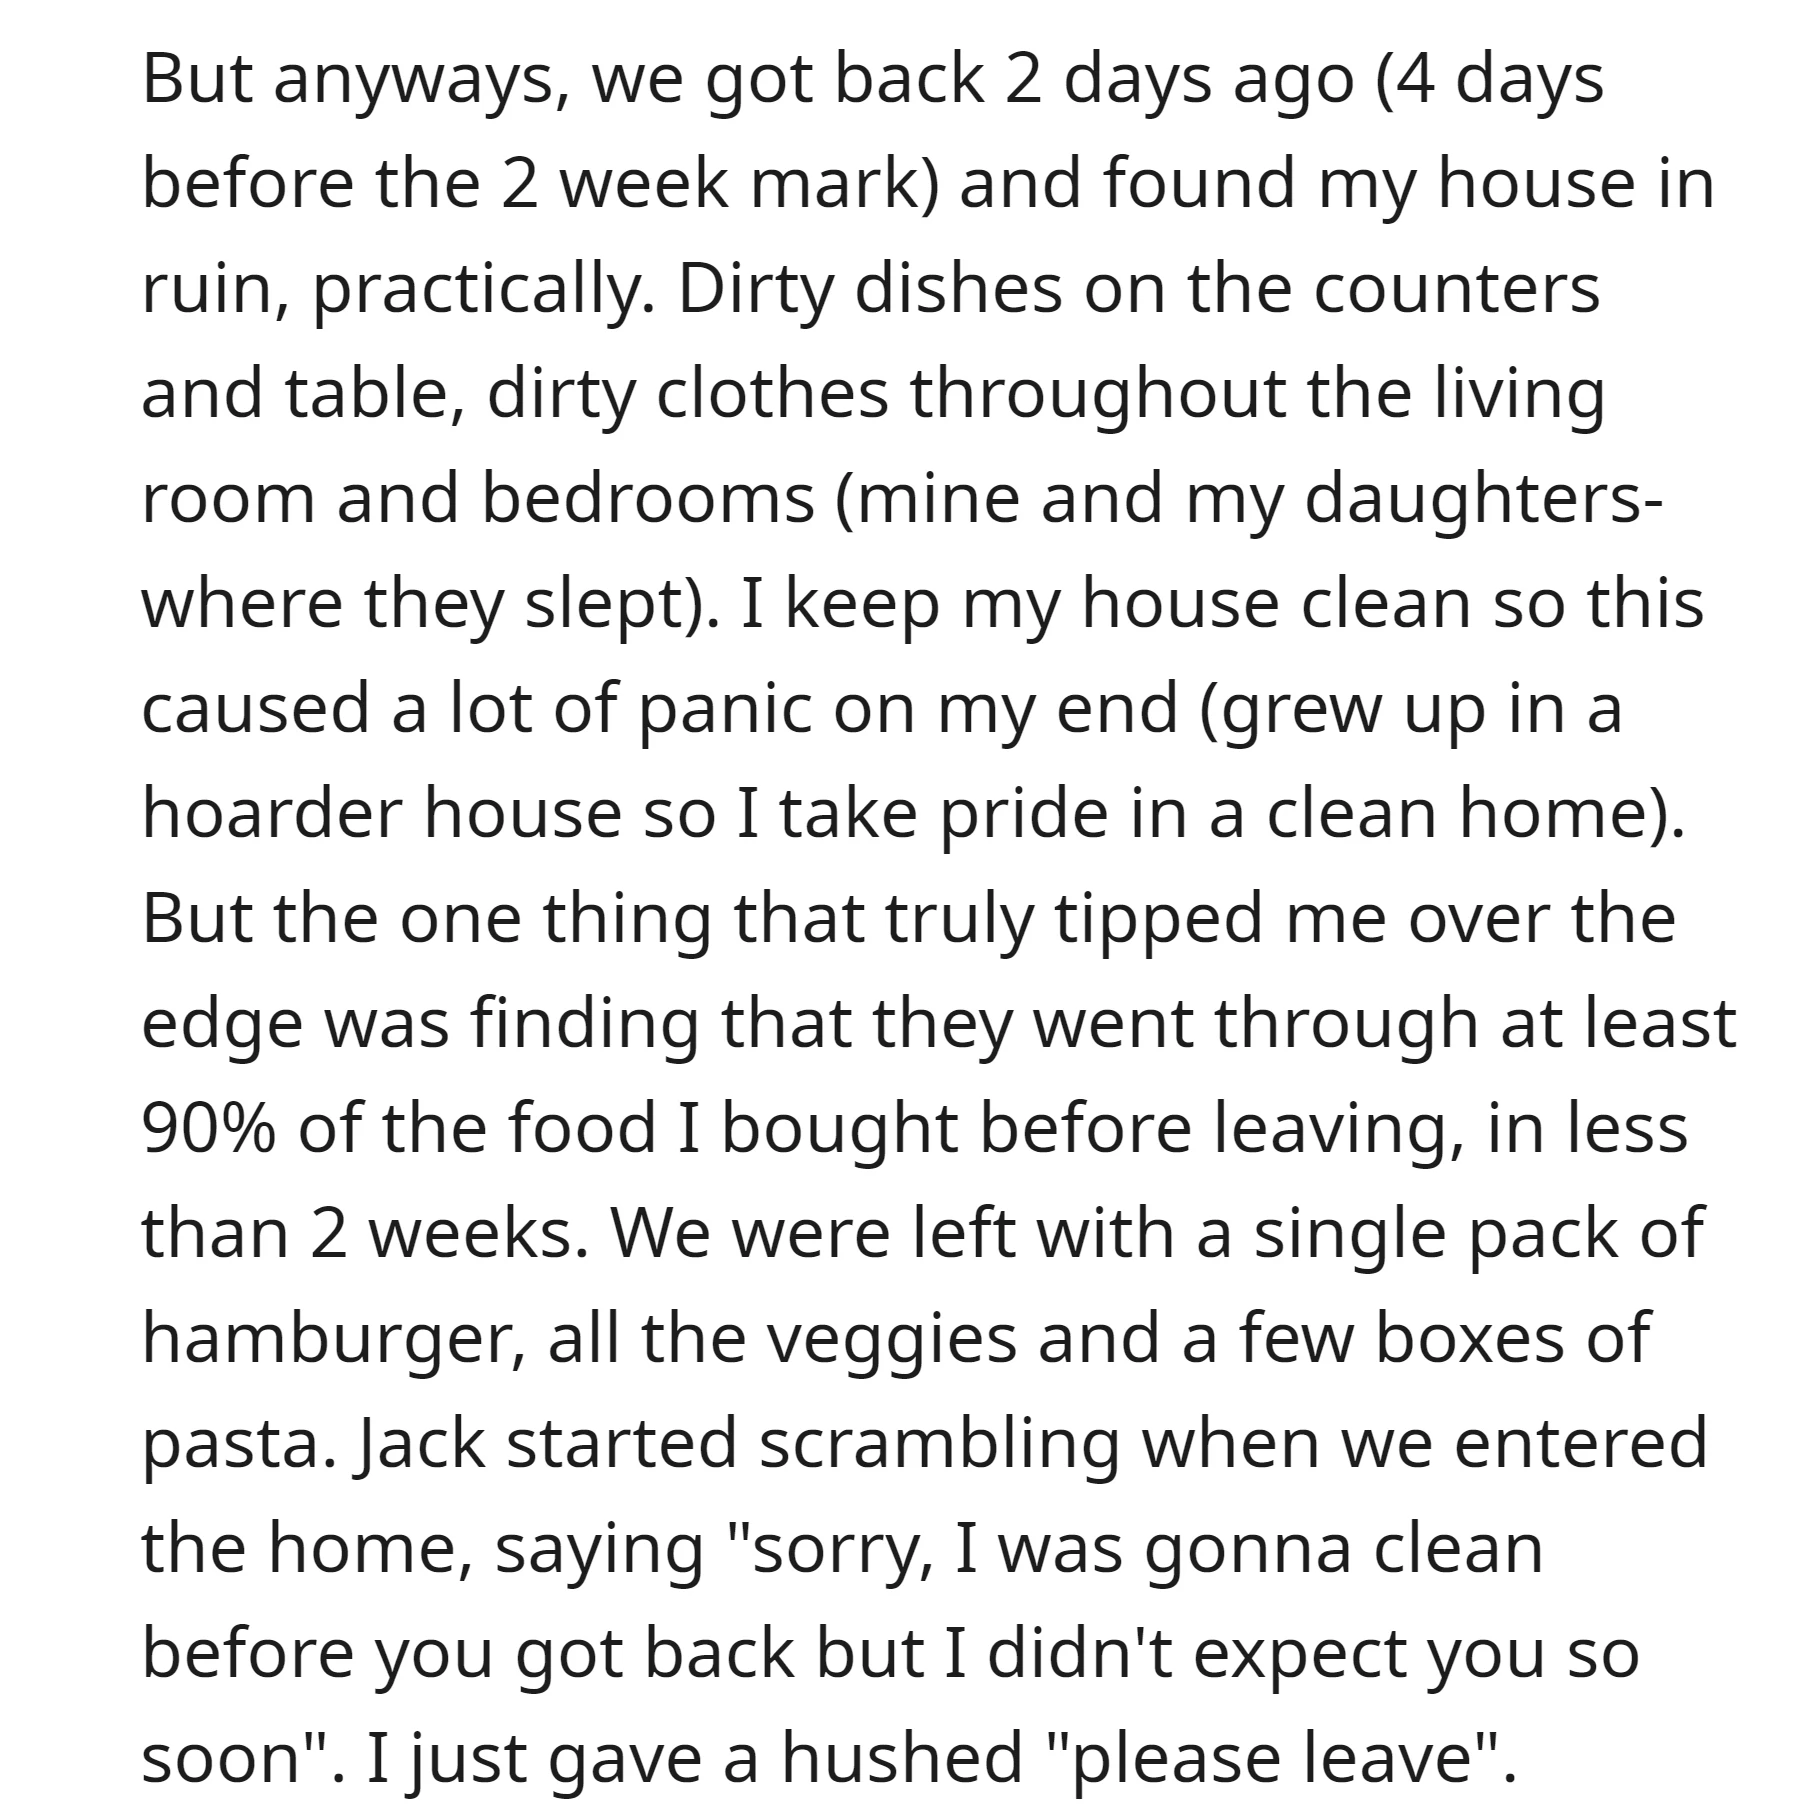 When OP returned home, she found her house in disarray with dirty dishes, scattered clothes